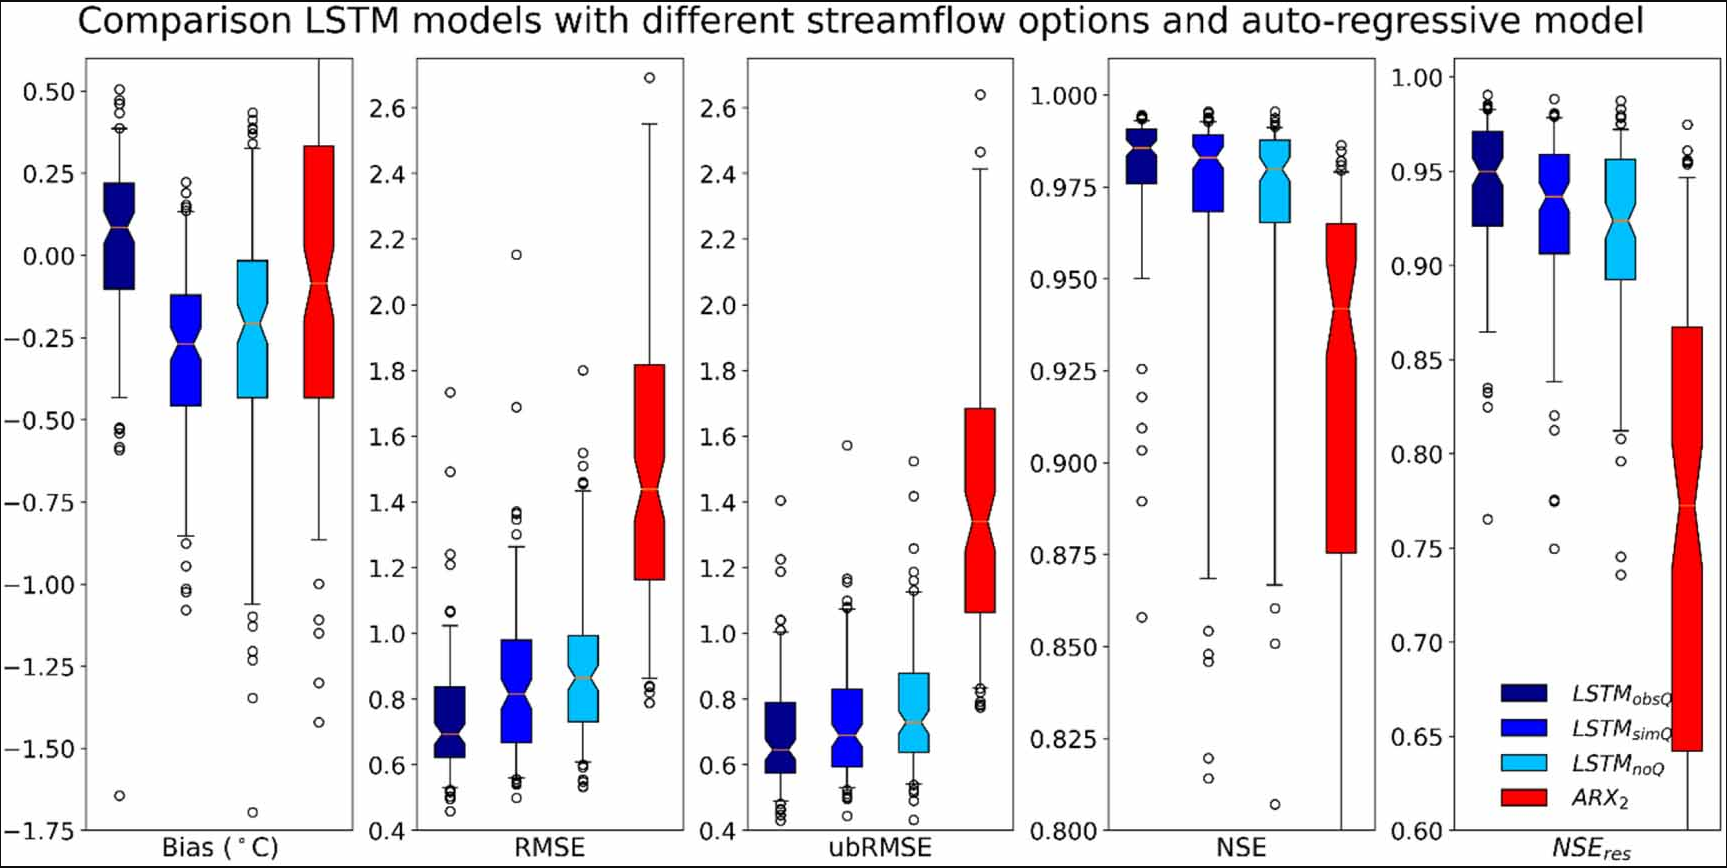 Temperature performance with and without streamflow